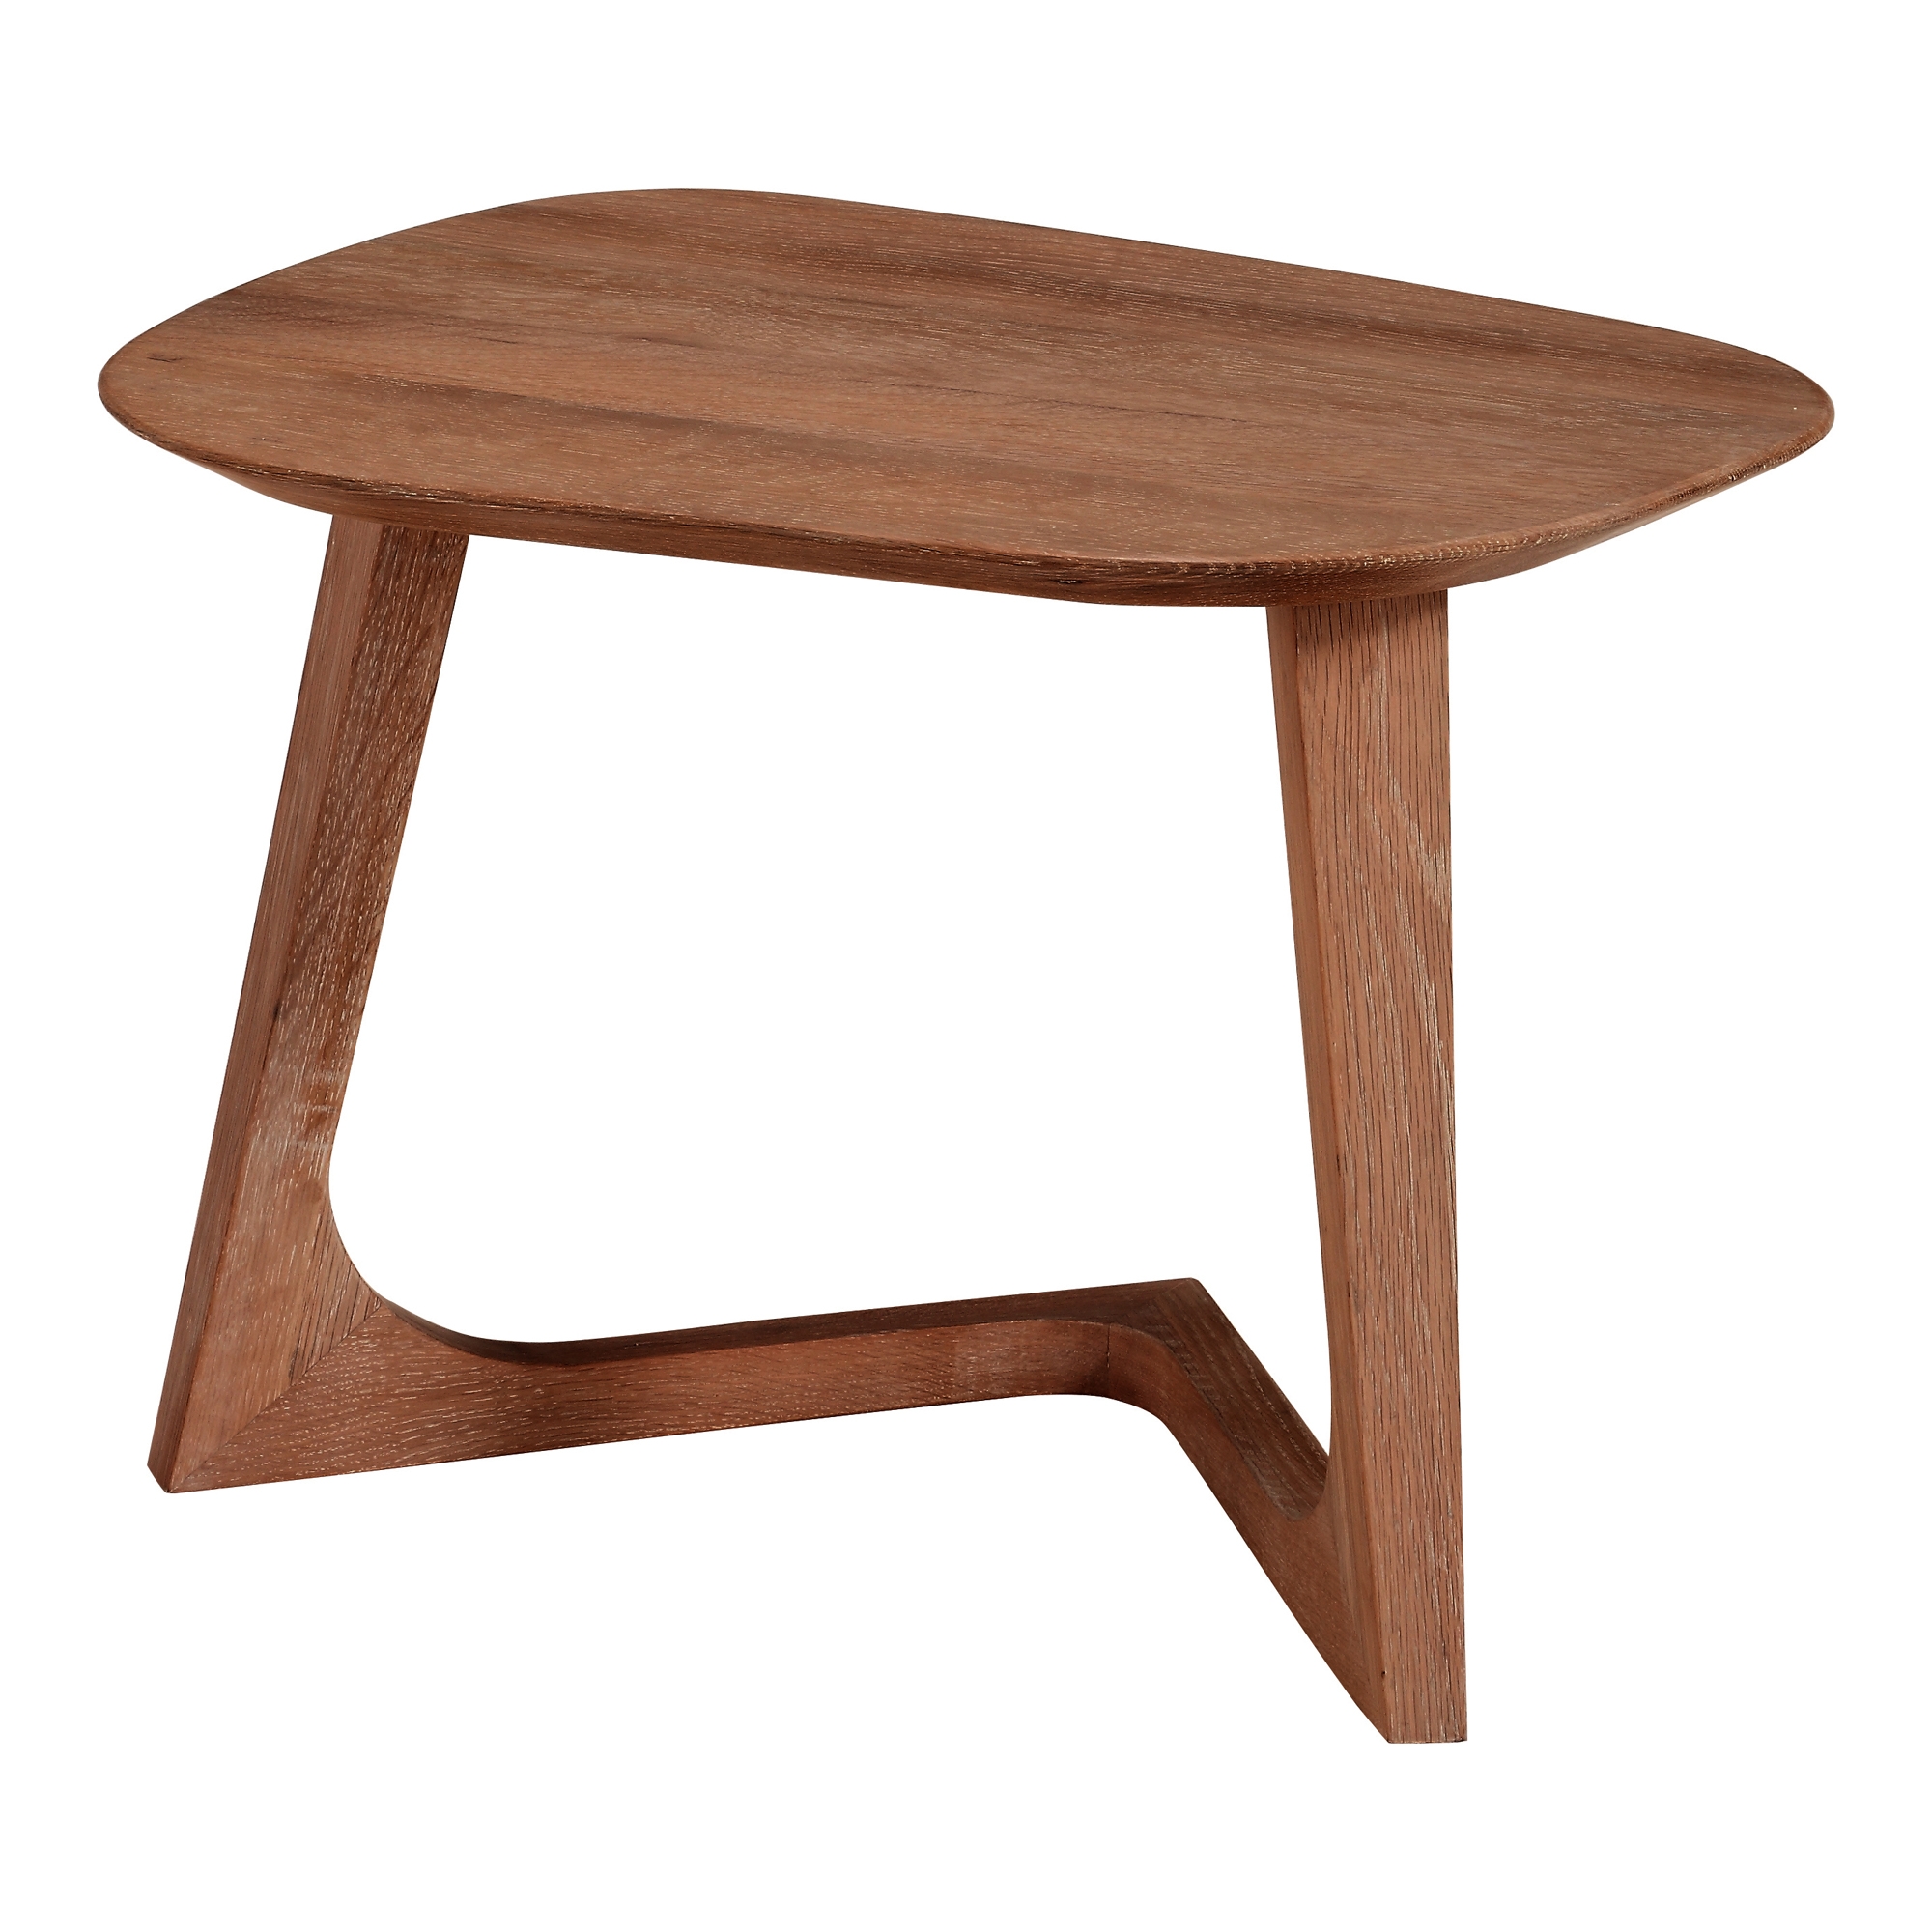 GODENZA END TABLE - Image 2